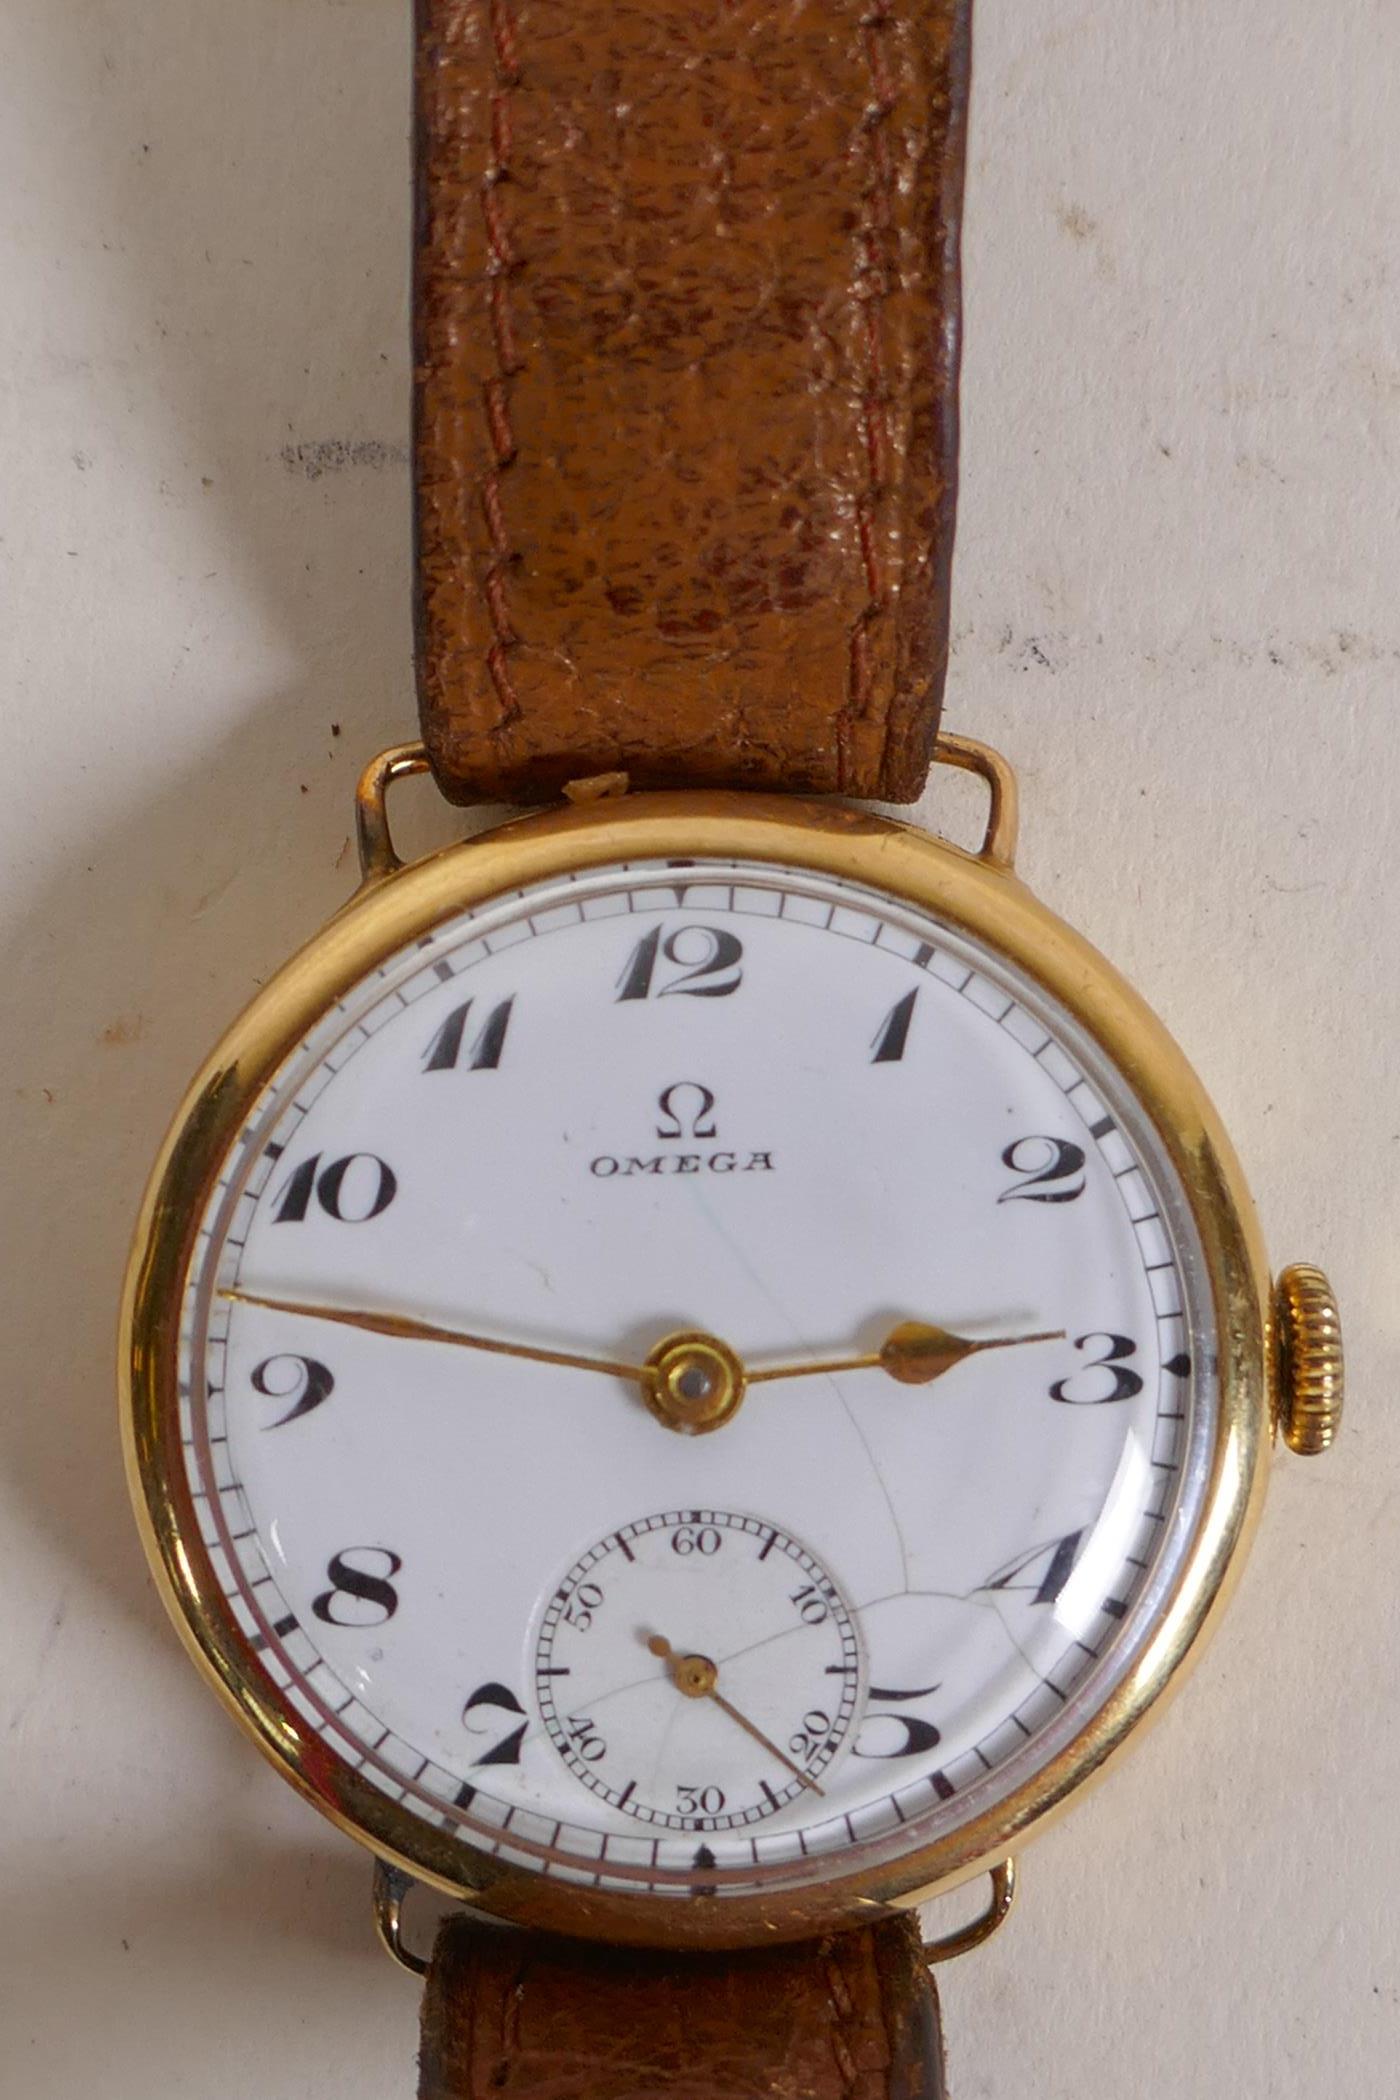 An Omega wrist watch in 18ct gold case, AF